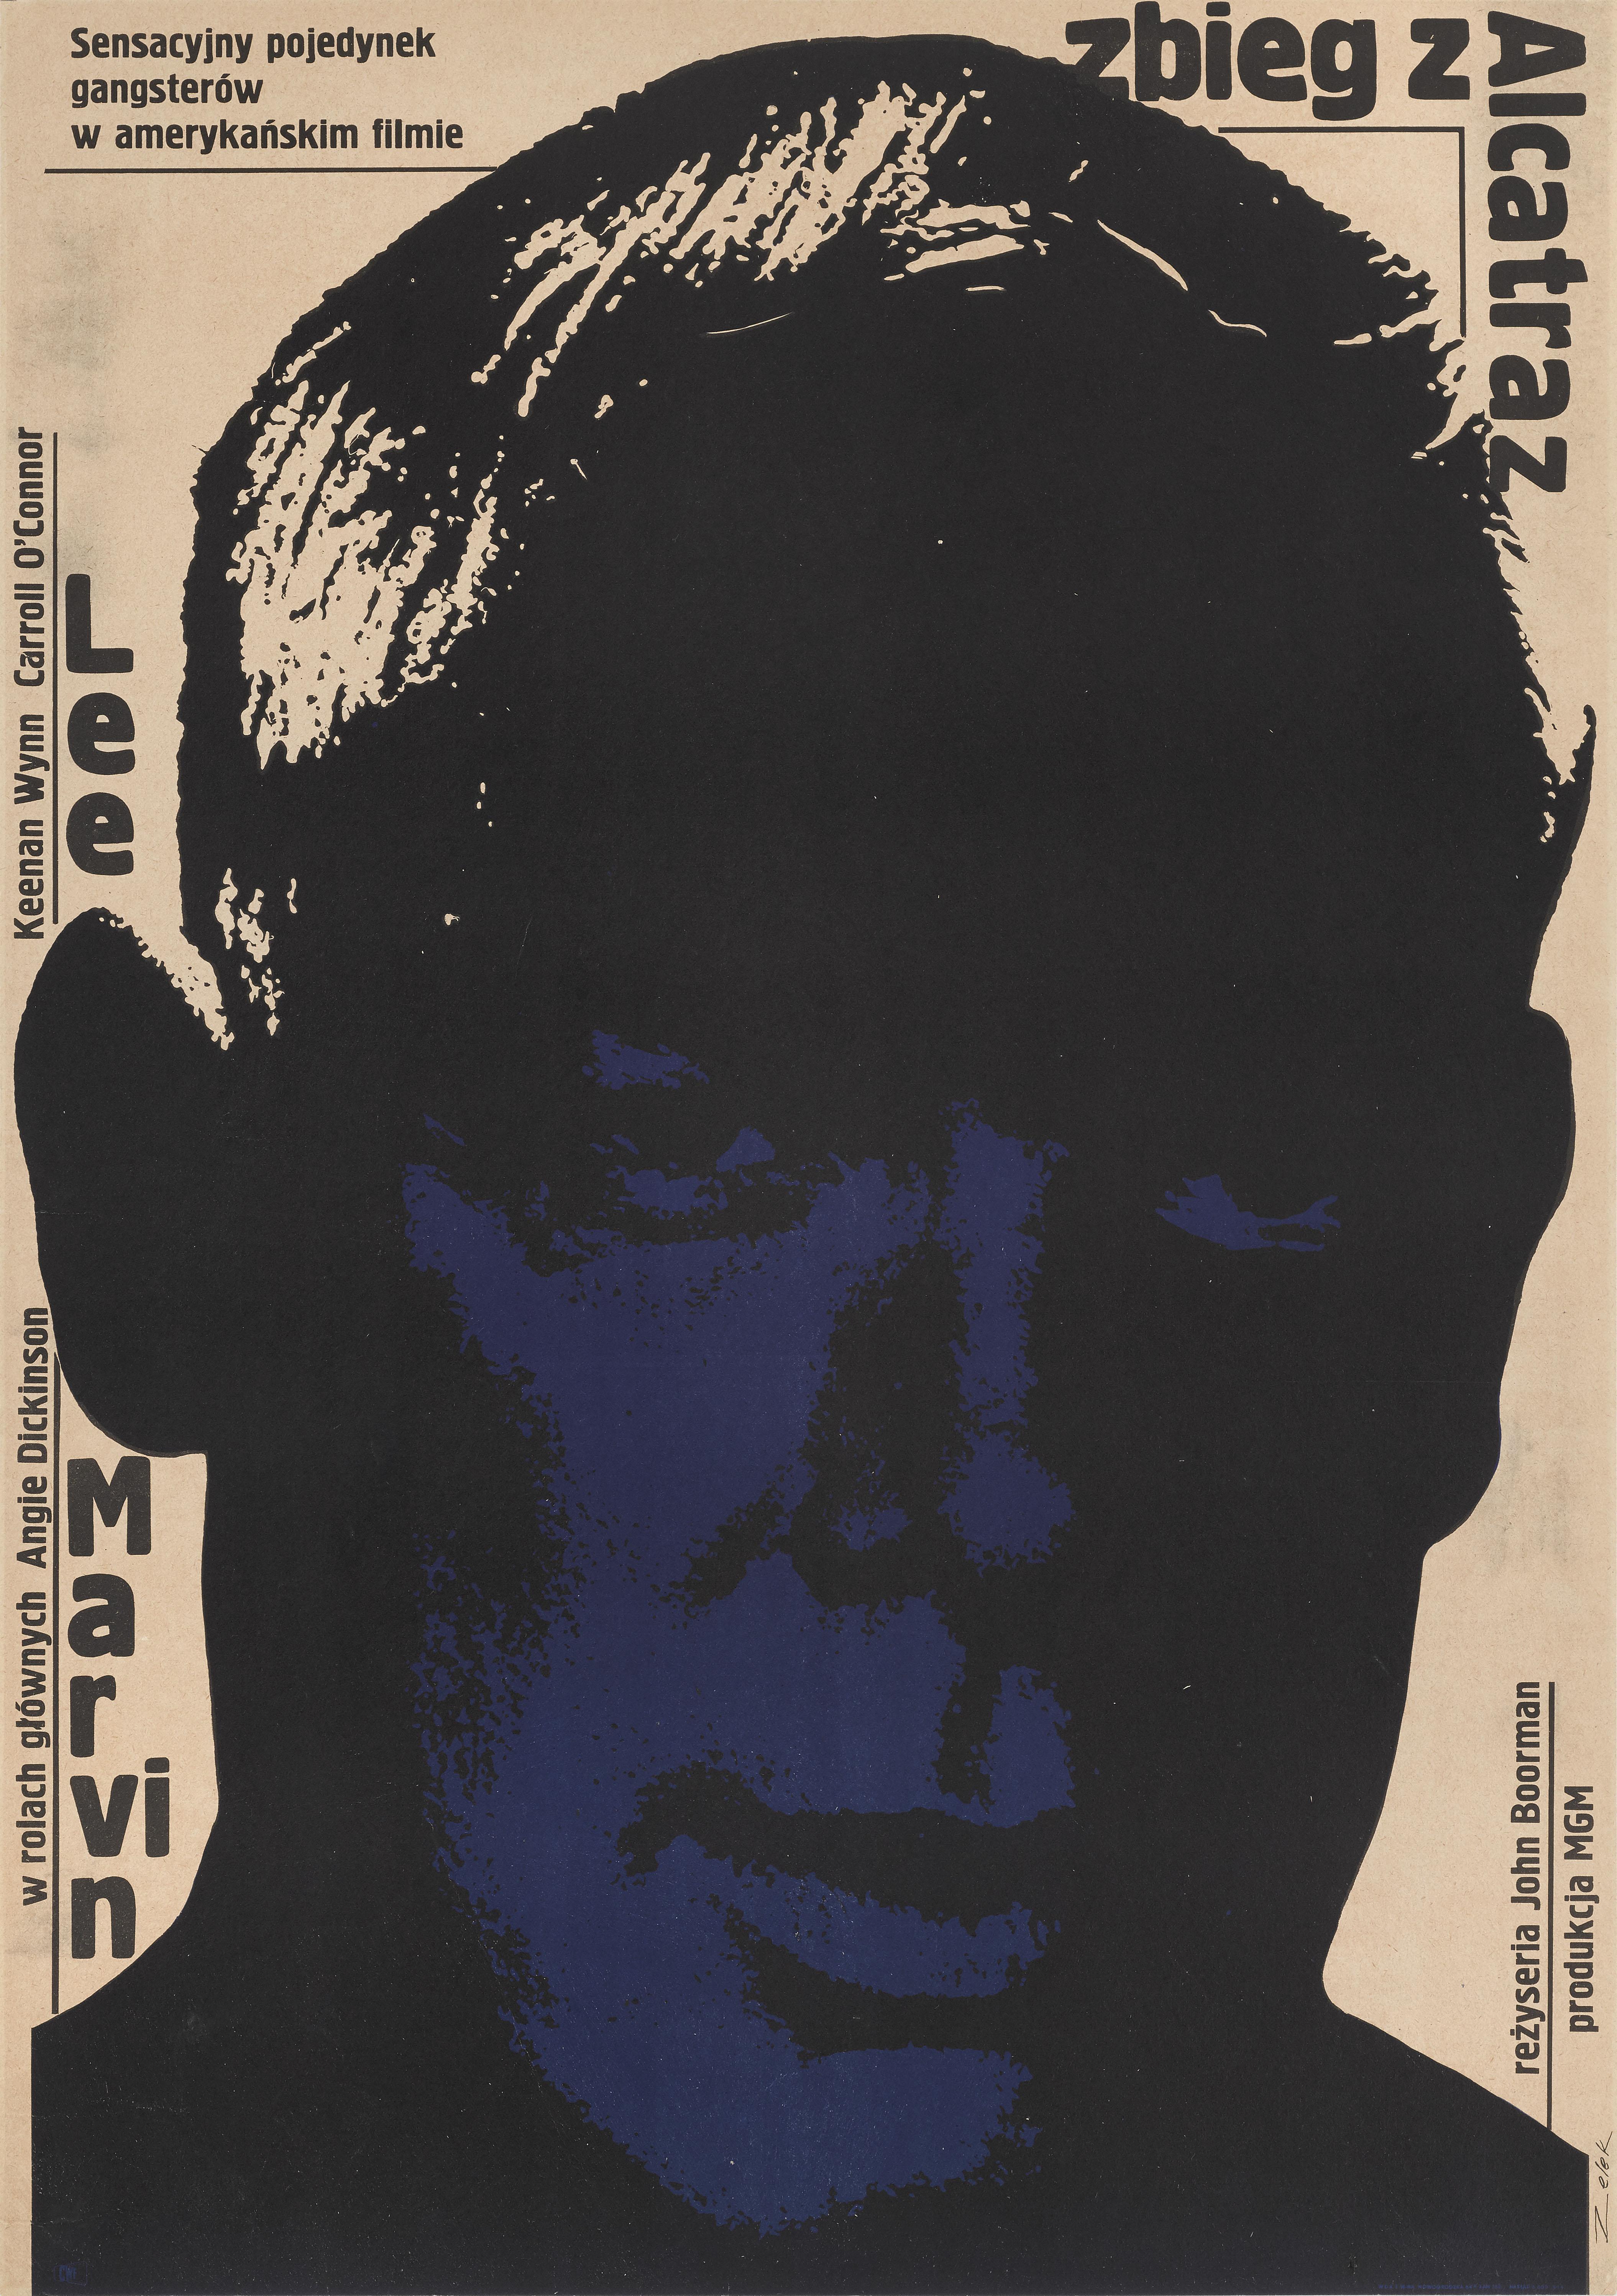 Original Polish film poster for 1967 film Point Blank. The film was directed by John Boorman at Lee Marvin's request, and stars Marvin, Angie Dickinson and Keenan Wynn. This film was not a box-office success at the time of release, but has gone on